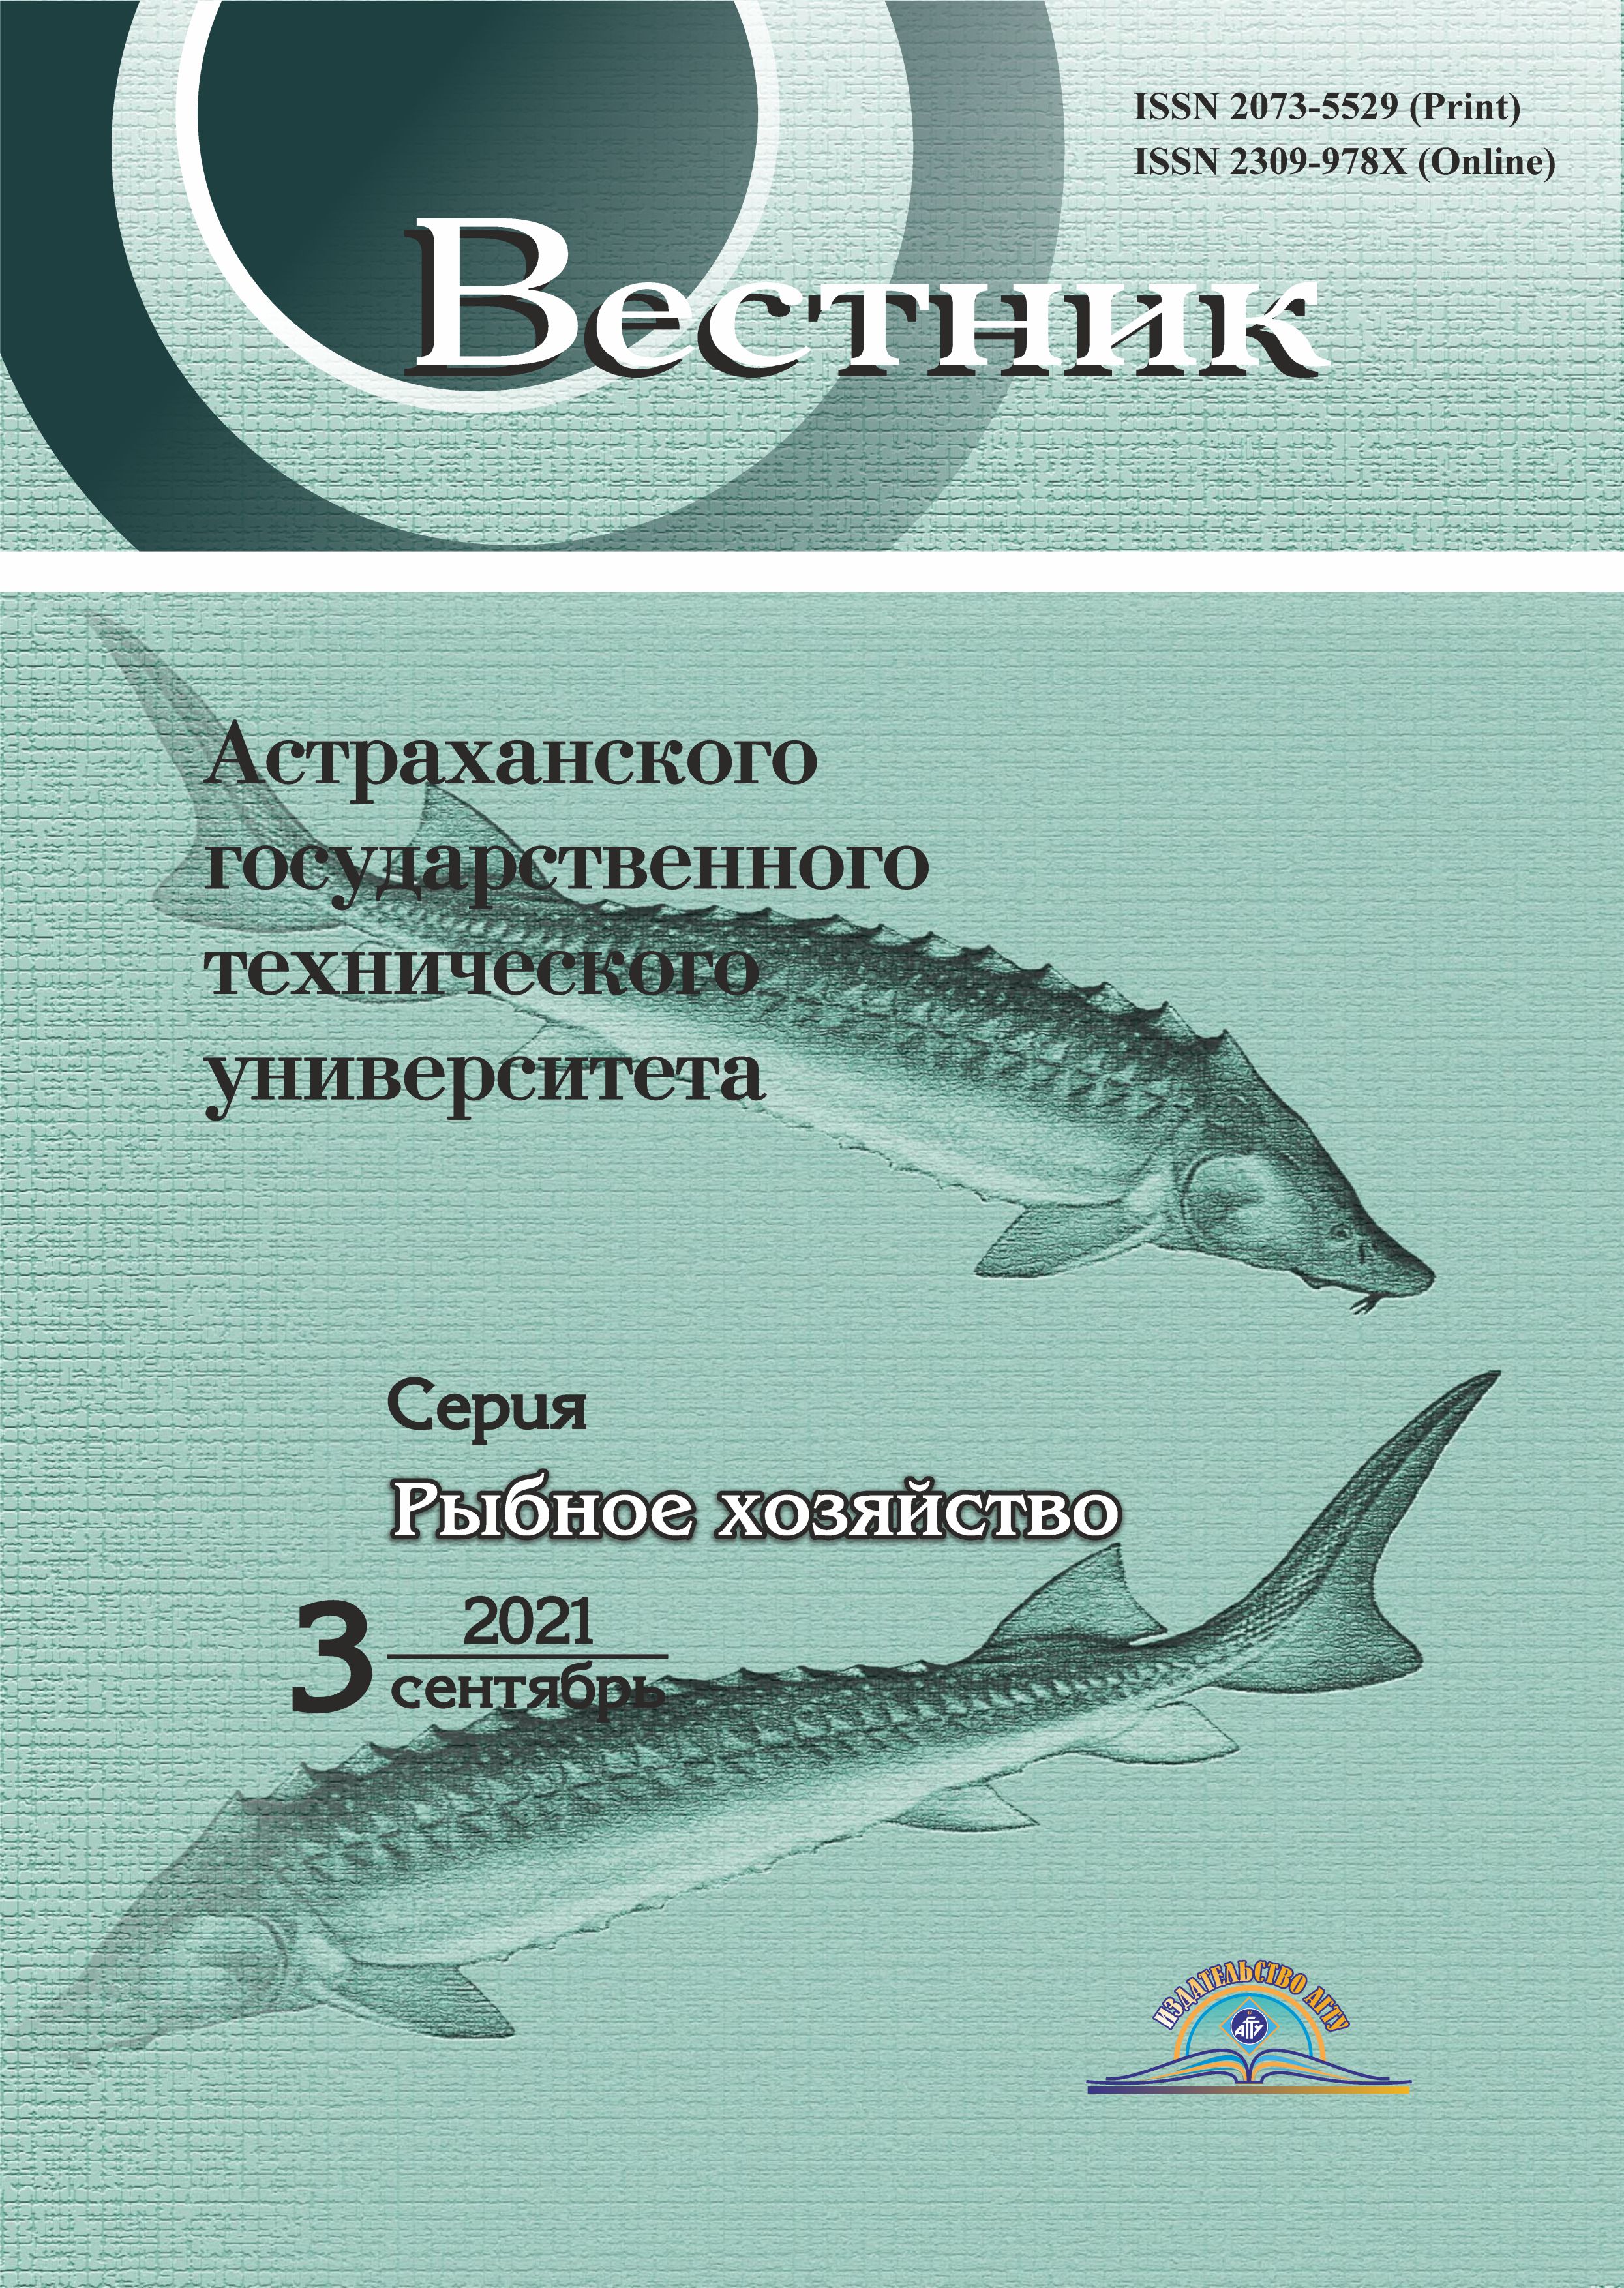                         OPTIMIZATION OF STAGES OF PRE-SPAWNING  AND SPAWNING PERIODS OF TILAPIA IN COMMERCIAL GROWING
            